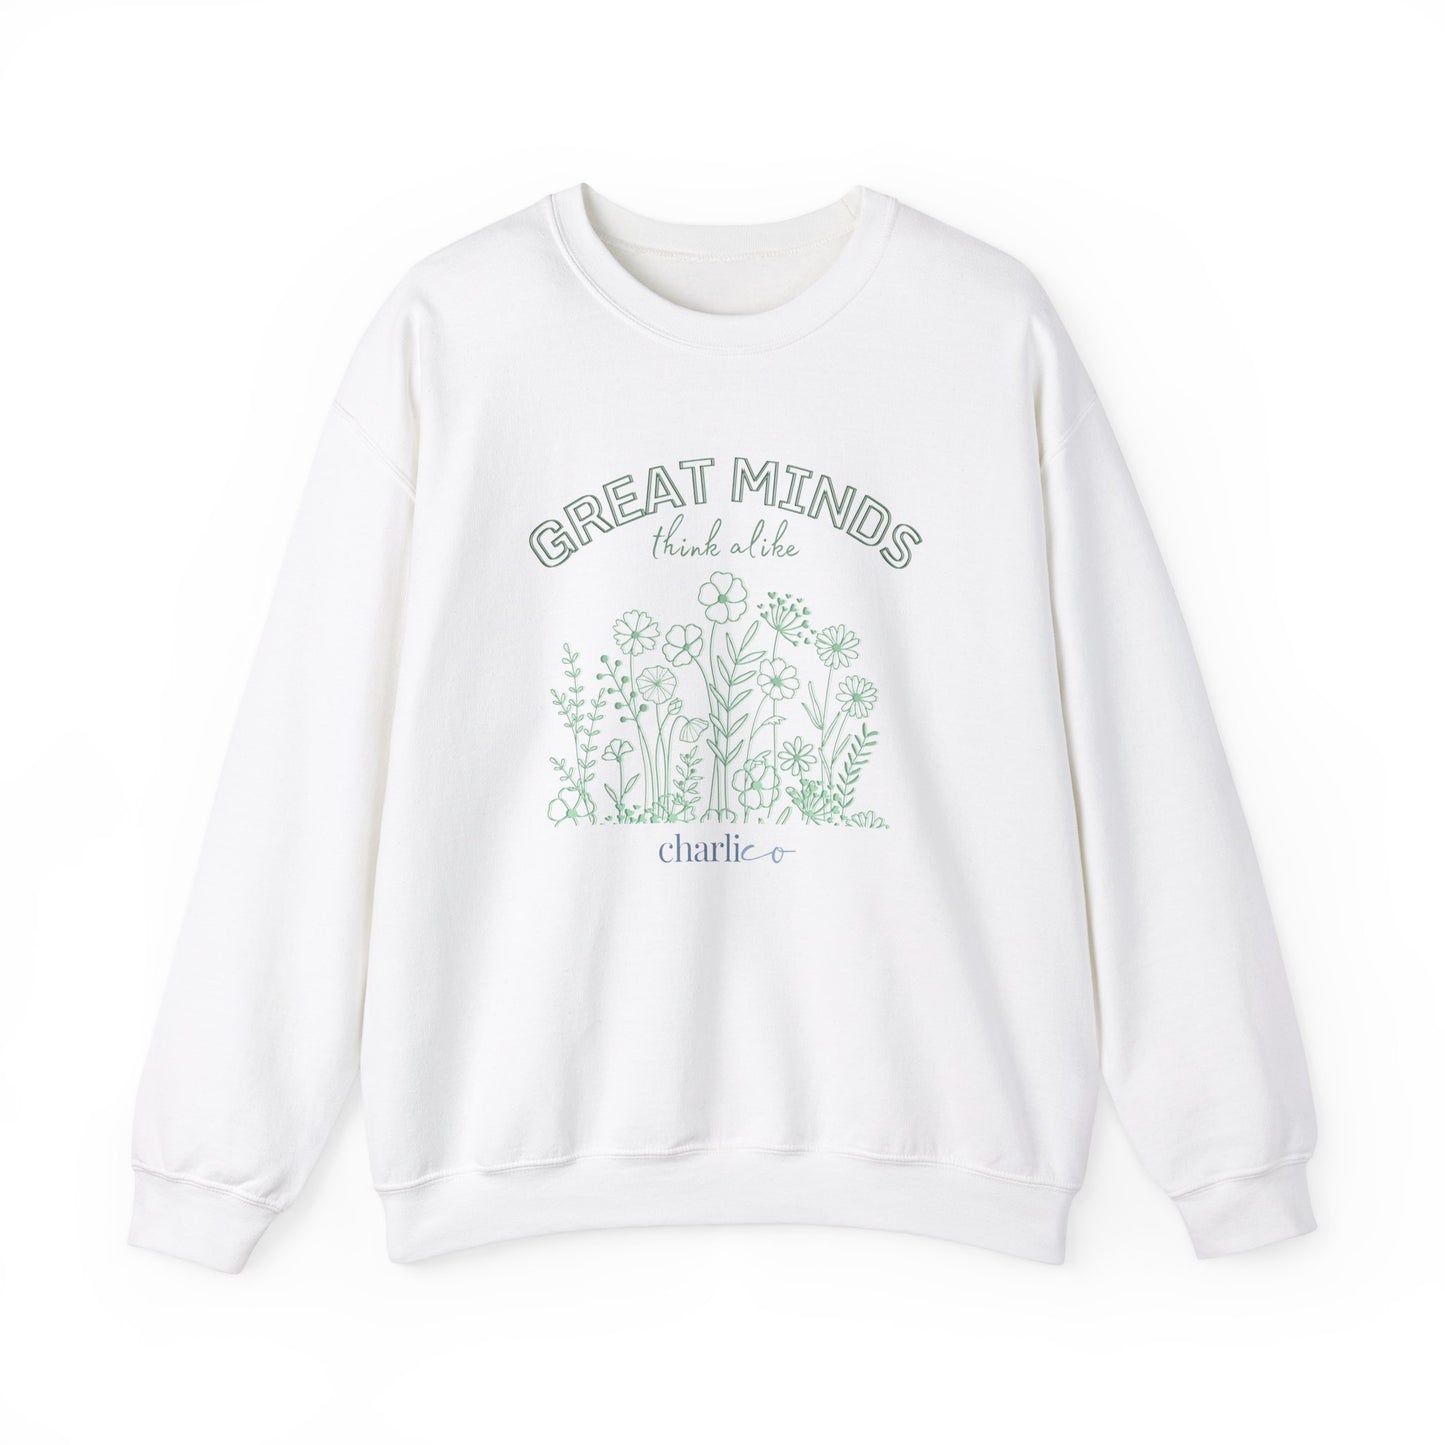 Crewneck Sweatshirt -great minds thing alike- for adults